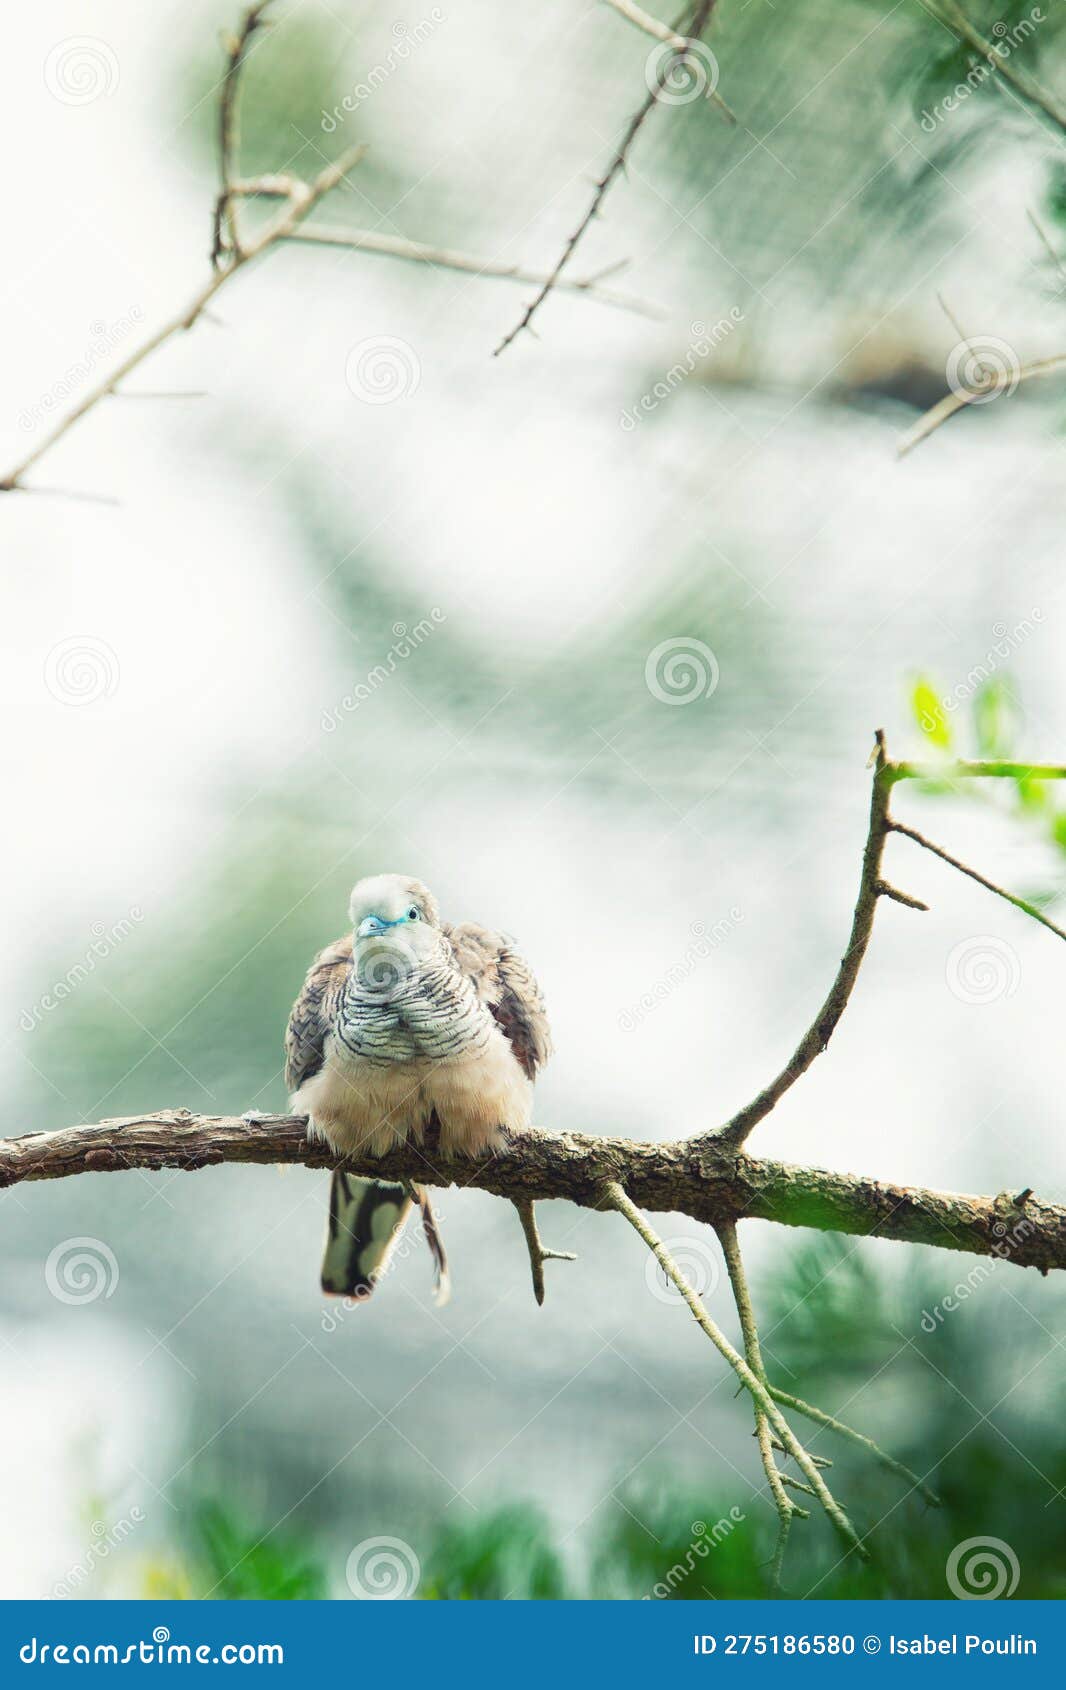 peacefull dove of geopelia placida perched on a branch